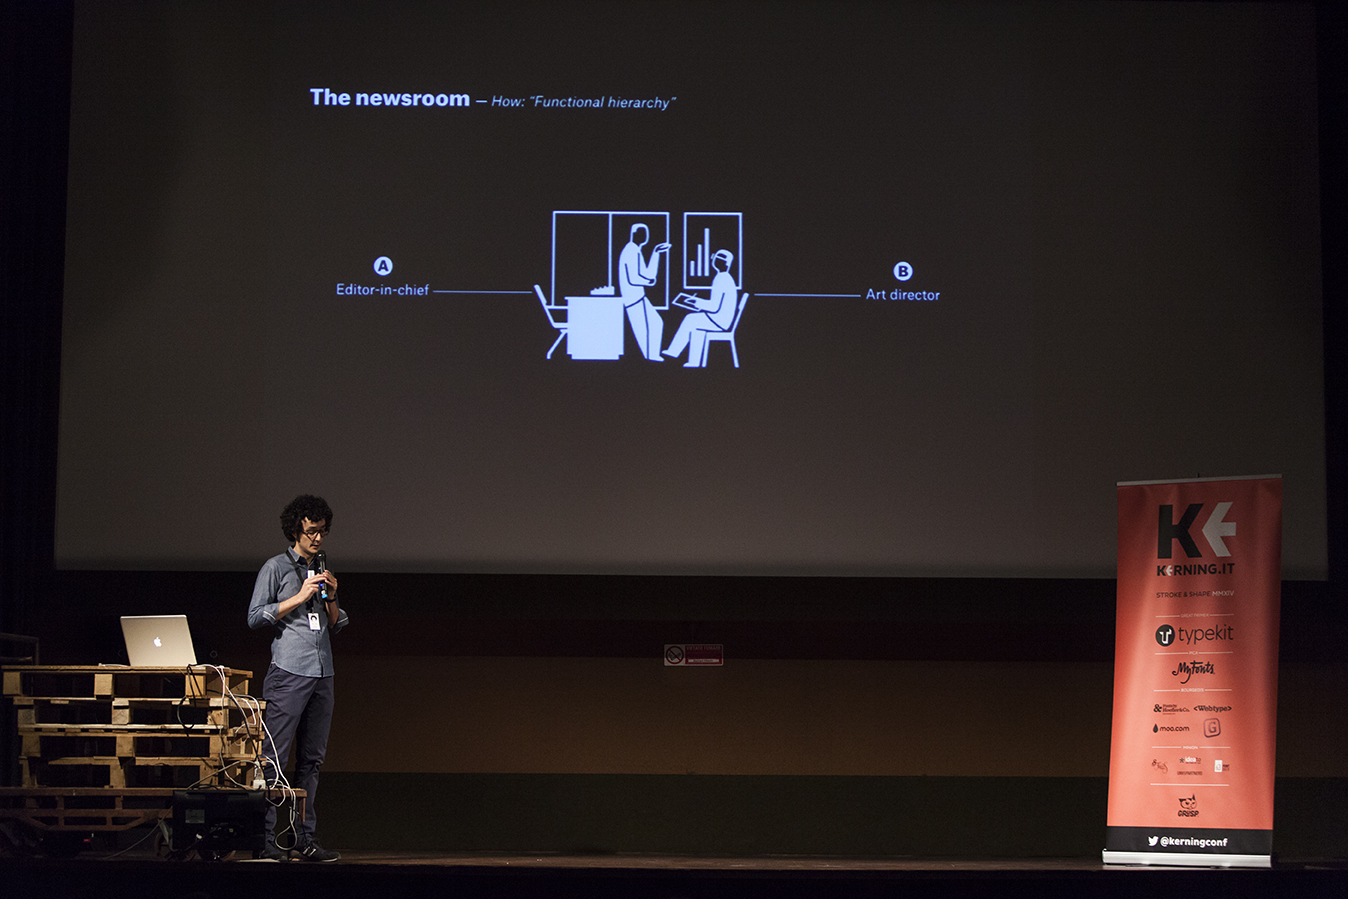 Francesco Franchi, art director at IL, the monthly magazine of Il Sole 24 ORE, delivered the opening keynote “Writing is no longer enough” at Kerning 2014.